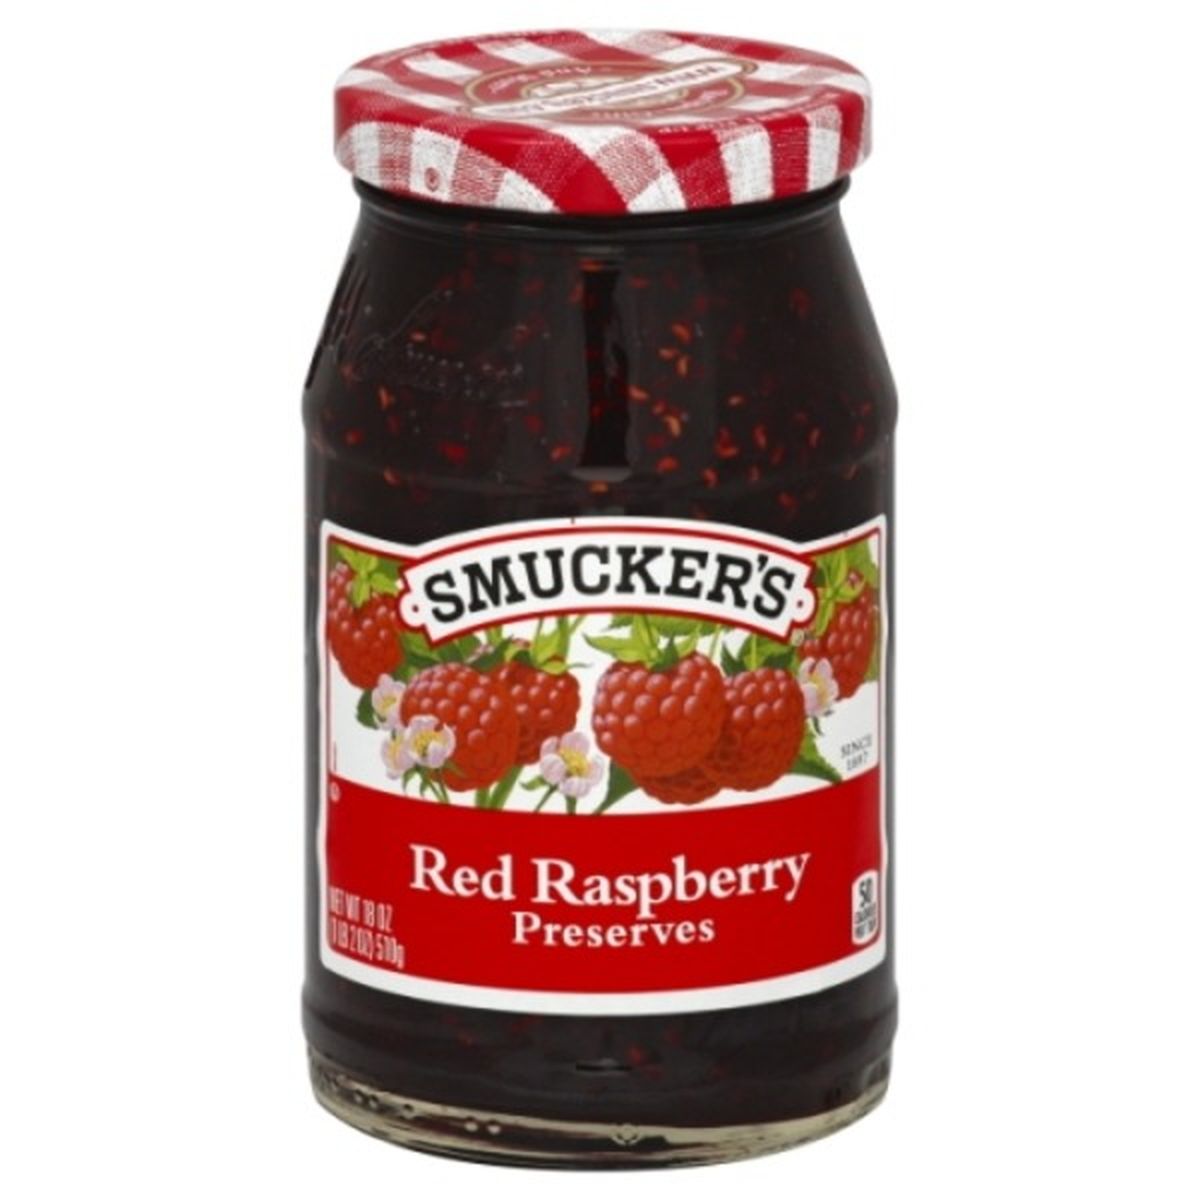 Calories in Smucker's Preserves, Red Raspberry